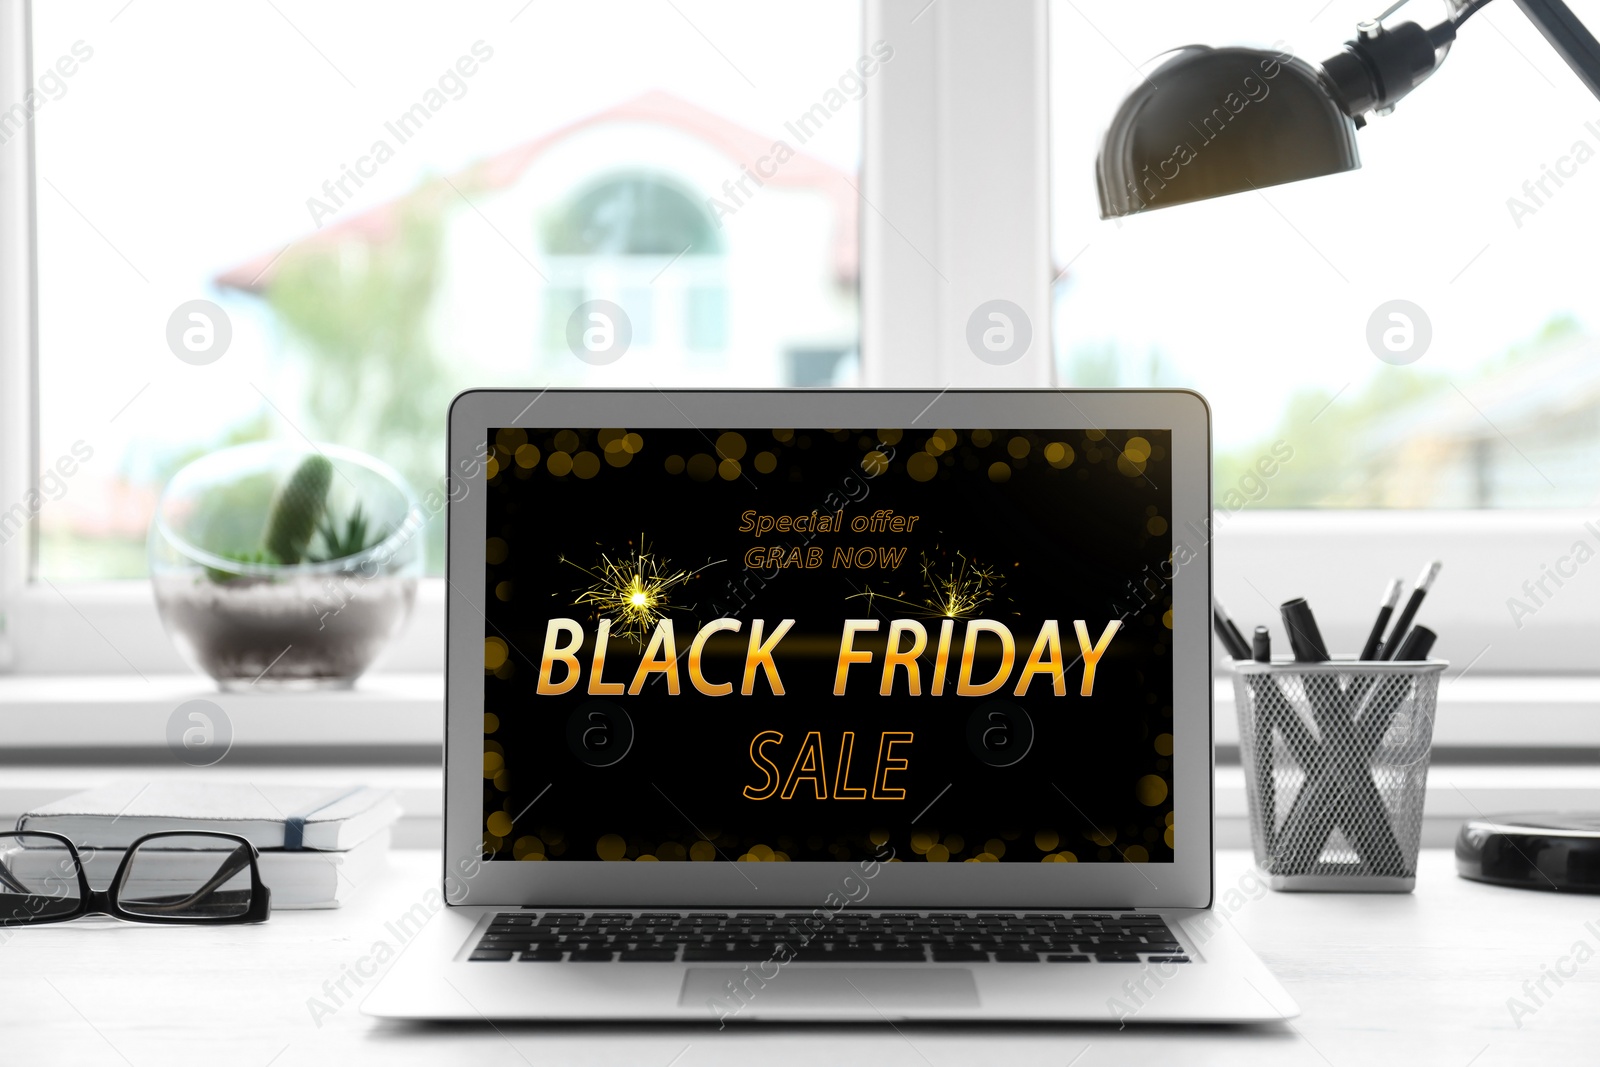 Image of Black Friday announcement on laptop screen. Online shopping